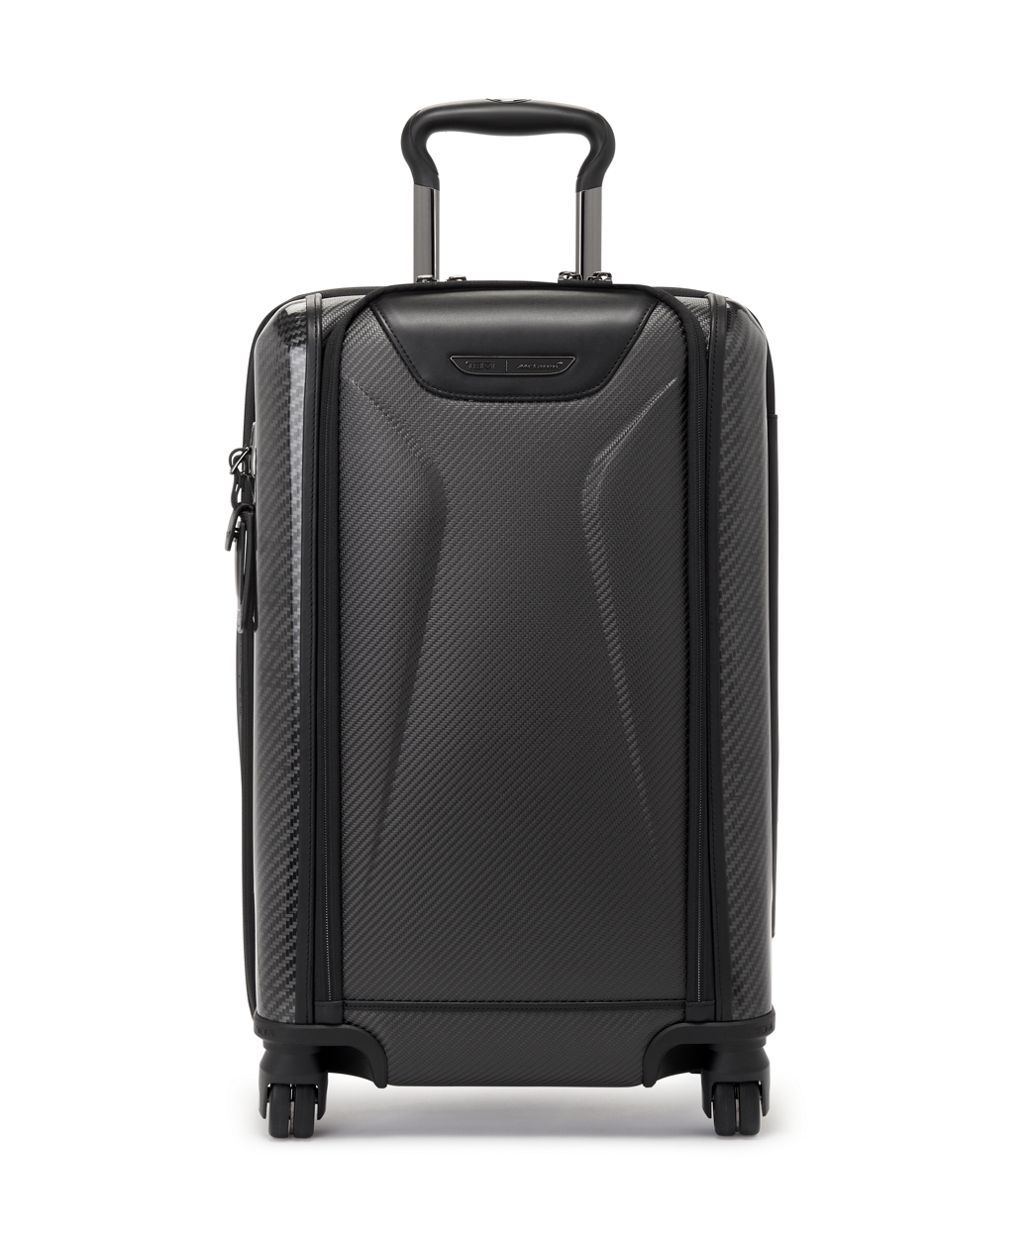 TUMI x McLaren Add Key Travel Accessory Pieces To Its Collection